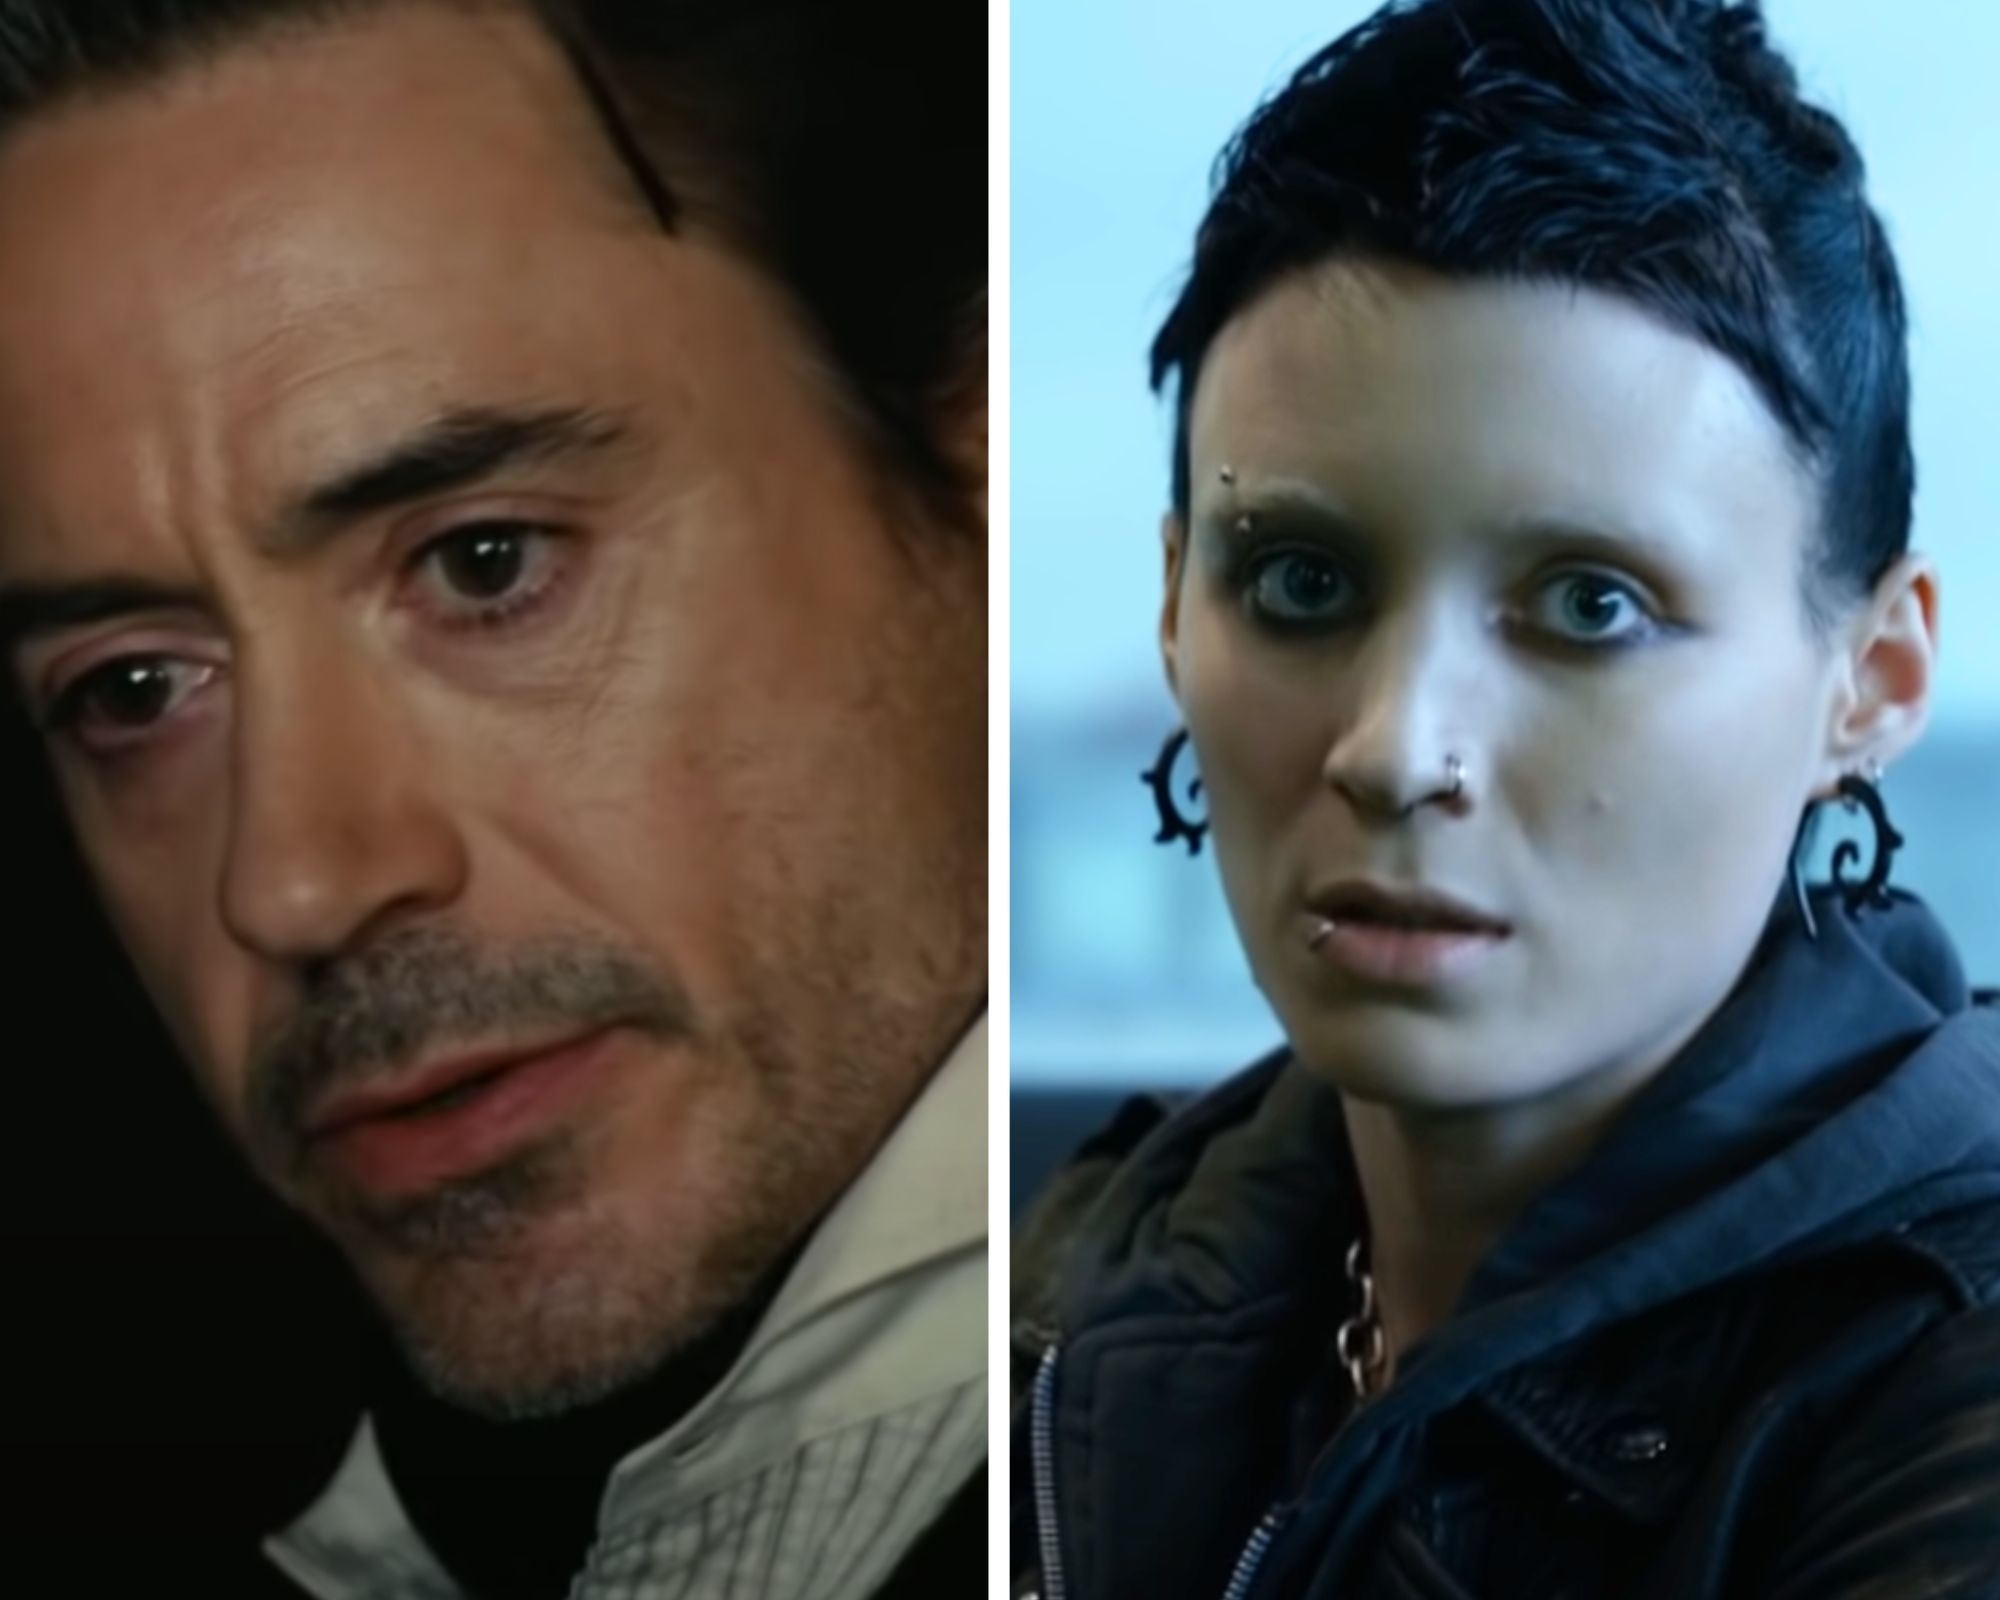 Robert Downey Jr. as Sherlock, and Rooney Mara as The Girl with The Dragon Tattoo